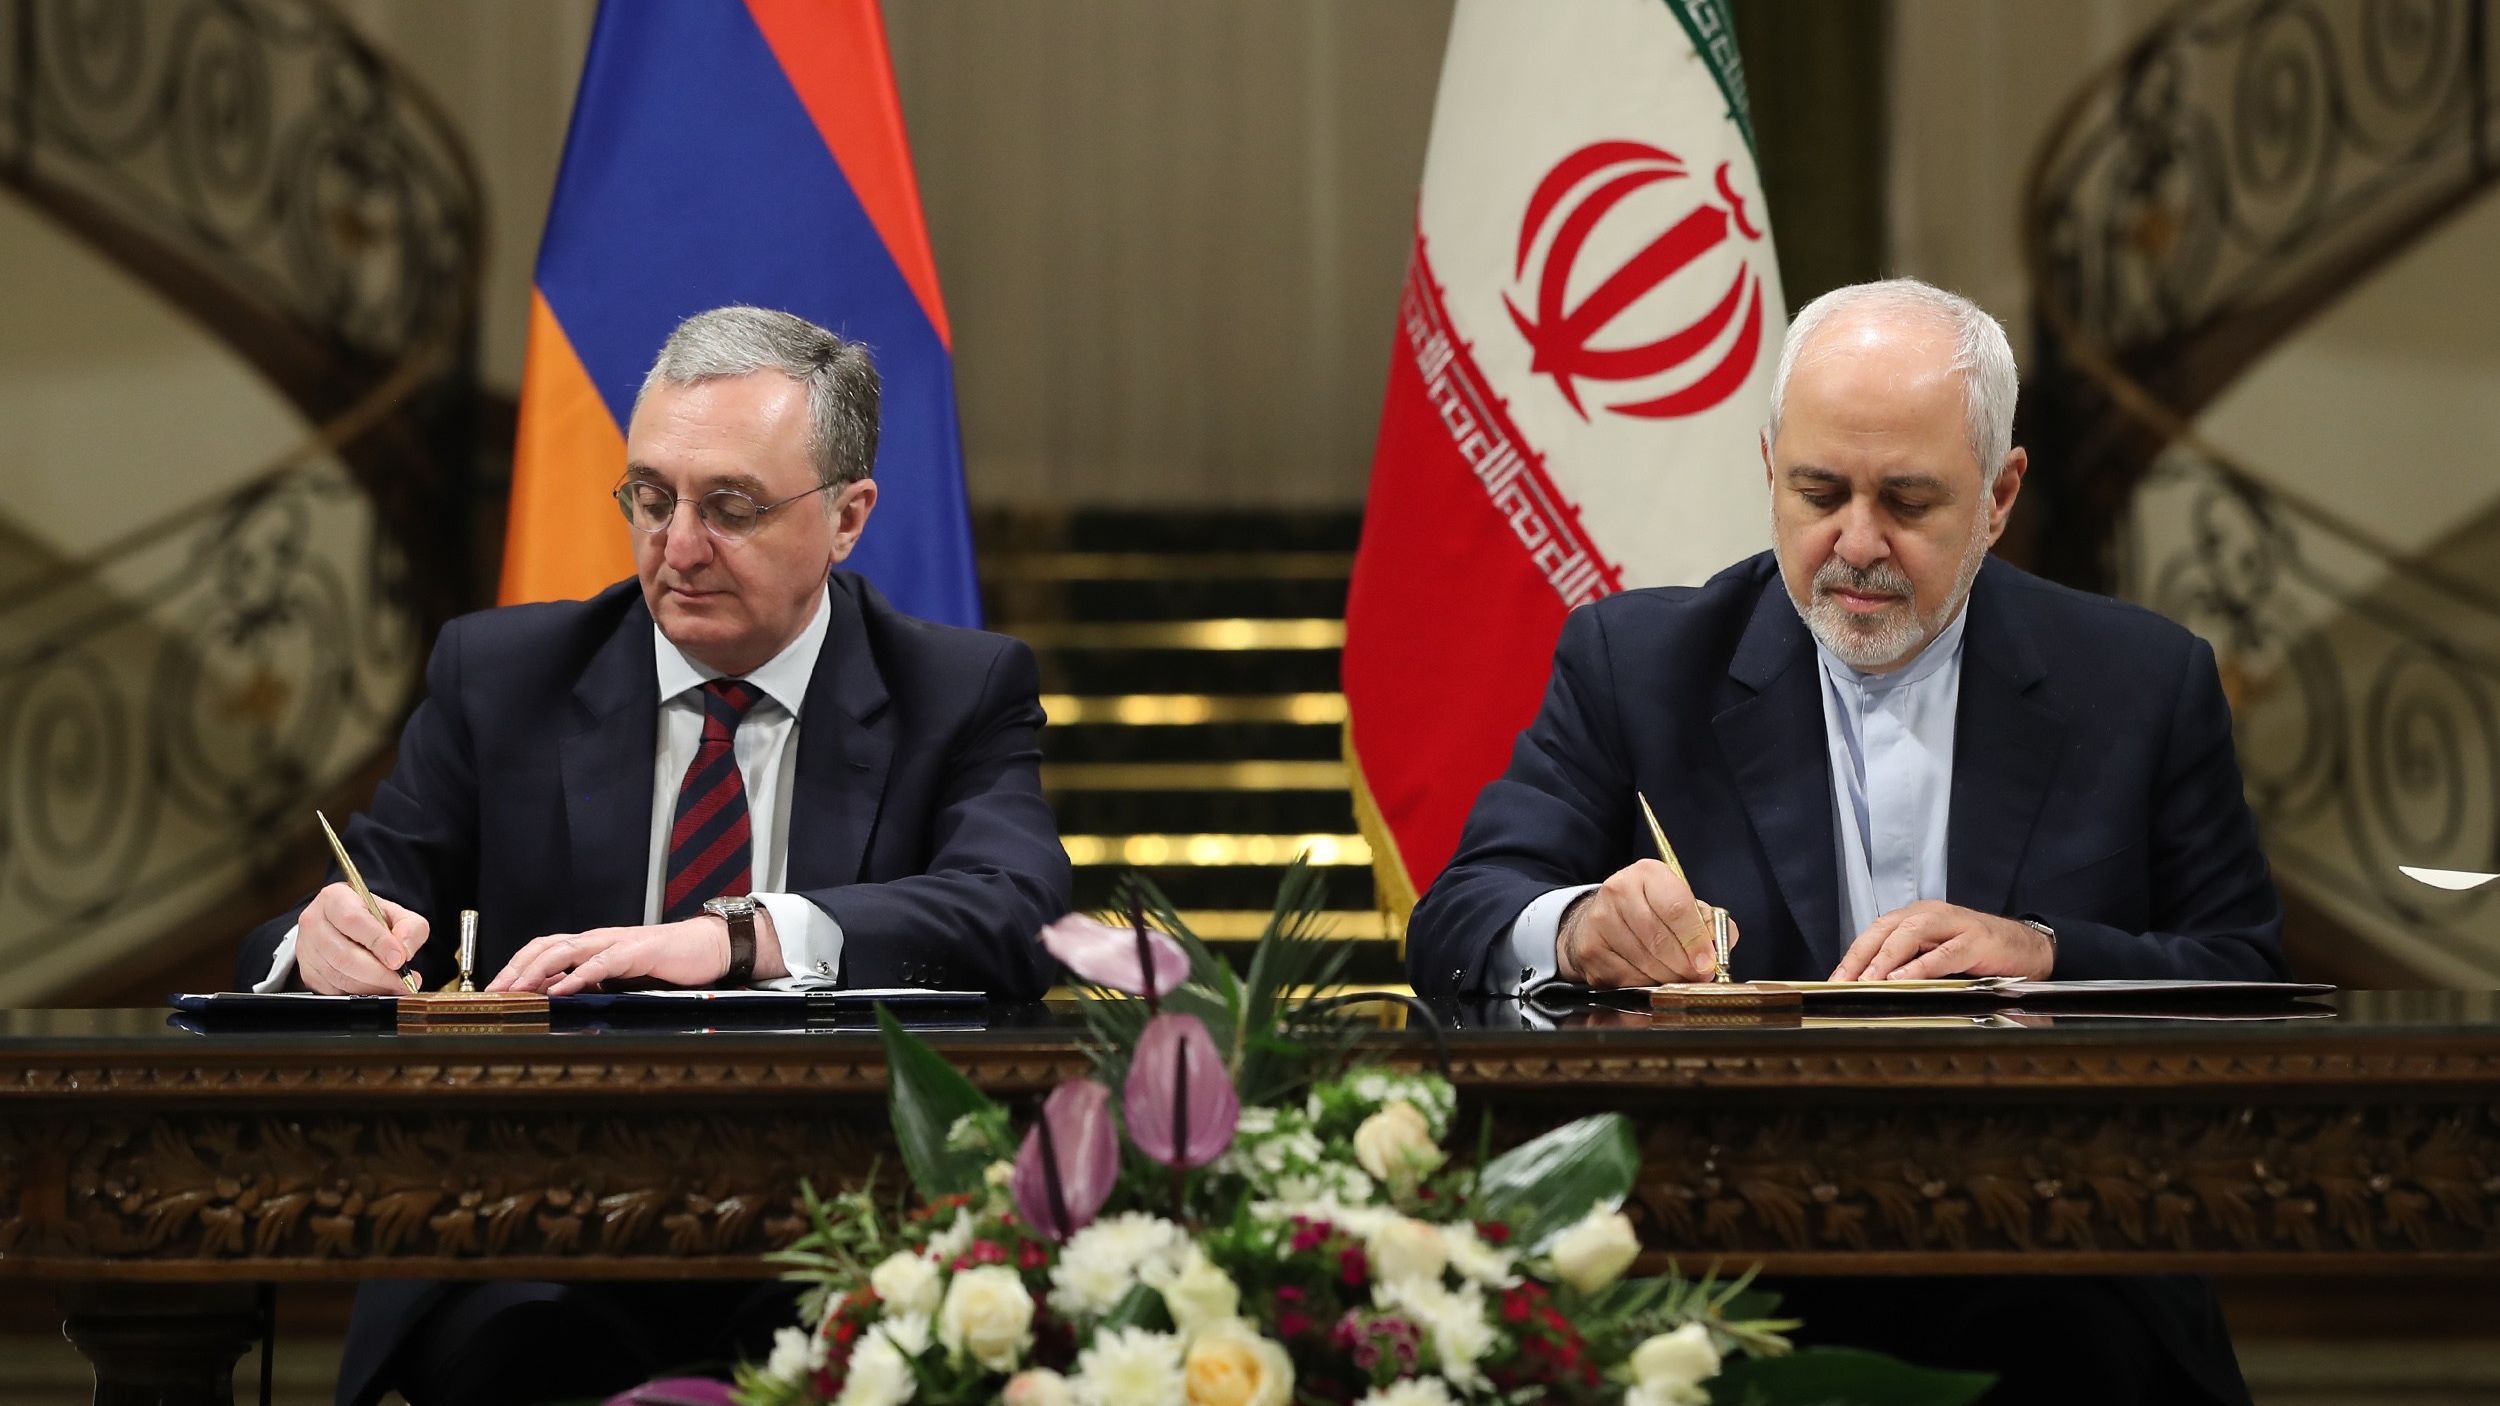 Iran's Foreign Minister Mohammad Javad Zarif, right, signs official documents with Armenian Minister of Foreign Affairs Zohrab Mnatsakanyan.